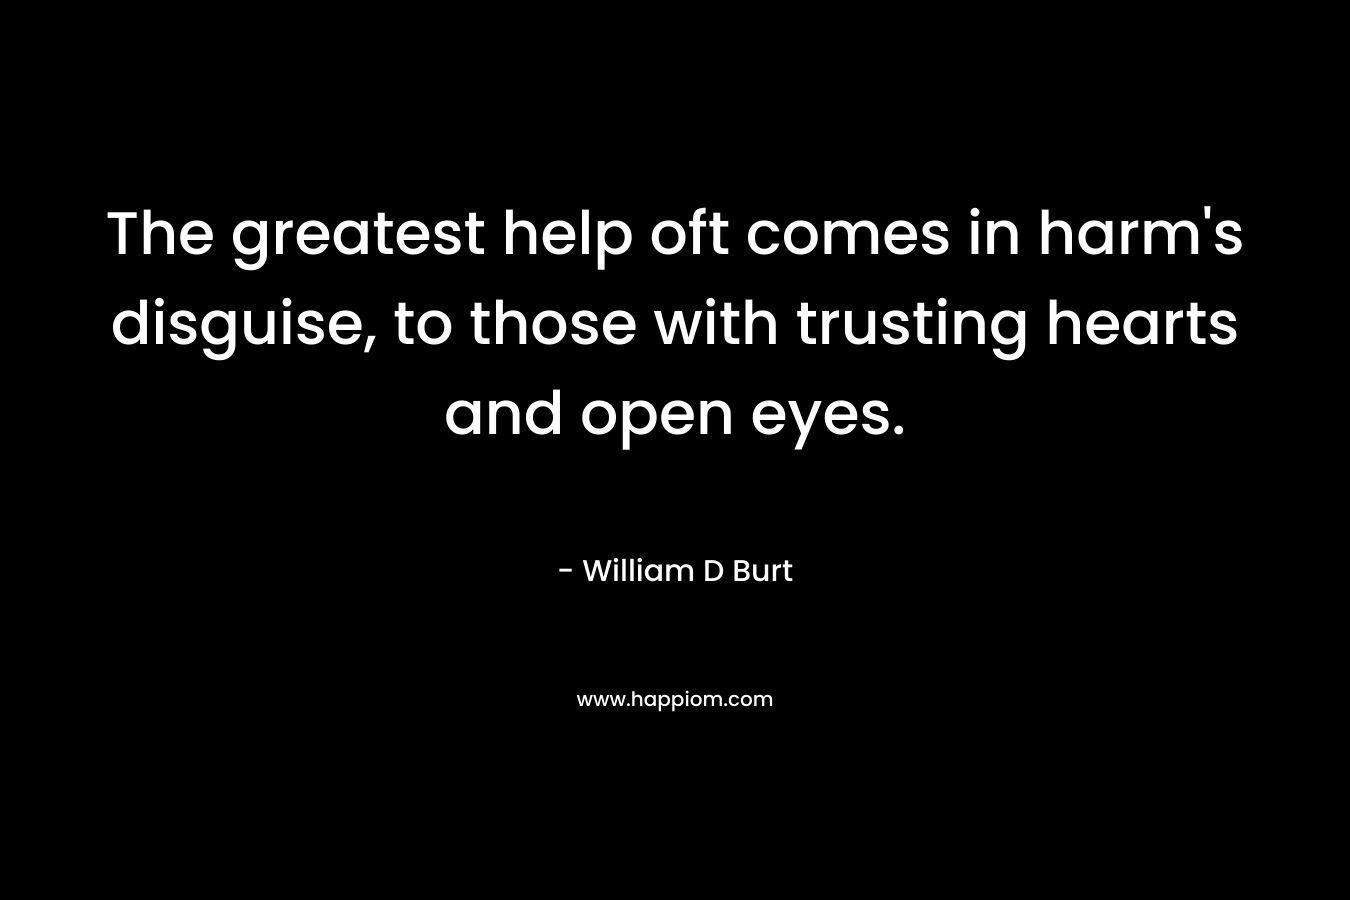 The greatest help oft comes in harm's disguise, to those with trusting hearts and open eyes.